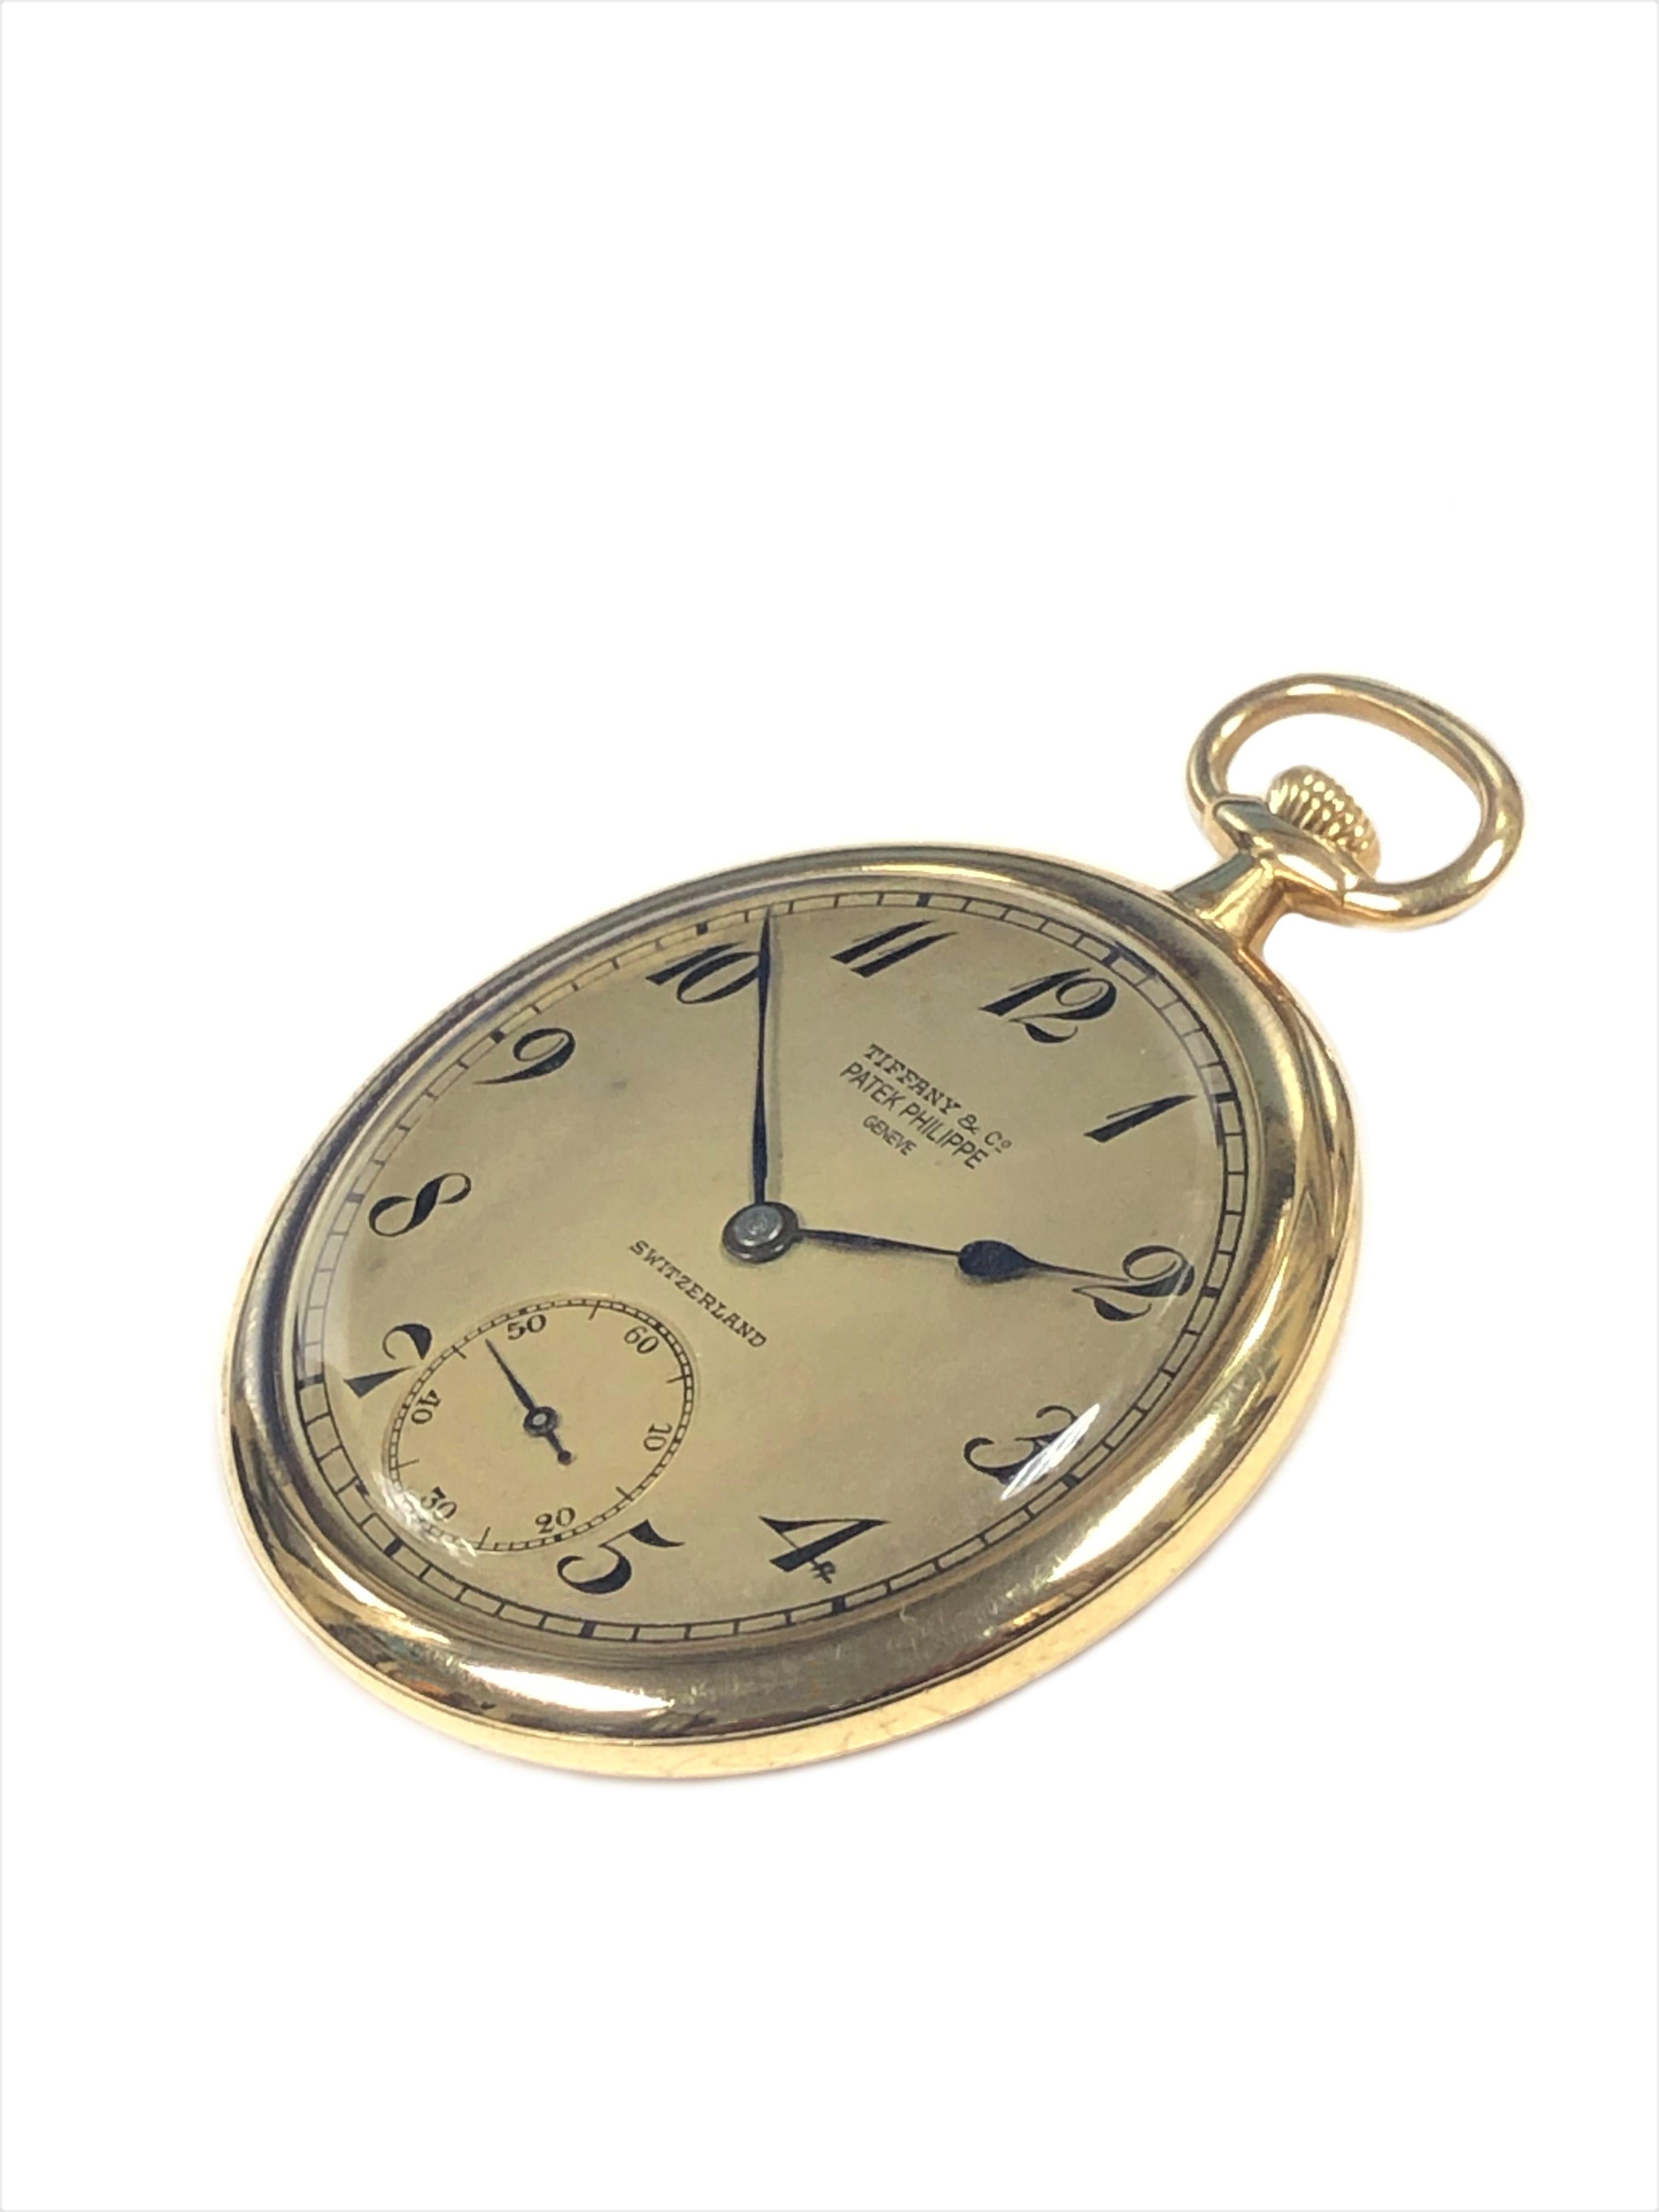 Circa 1920s Patek Philippe for Tiffany & Company pocket watch, 18K Yellow Gold 45 M.M. 3 piece case, signed Patek Philippe and Tiffany & Company. 18 Jewel Manual wind mechanical nickle lever movement signed Patek Philippe and Tiffany & Company, both